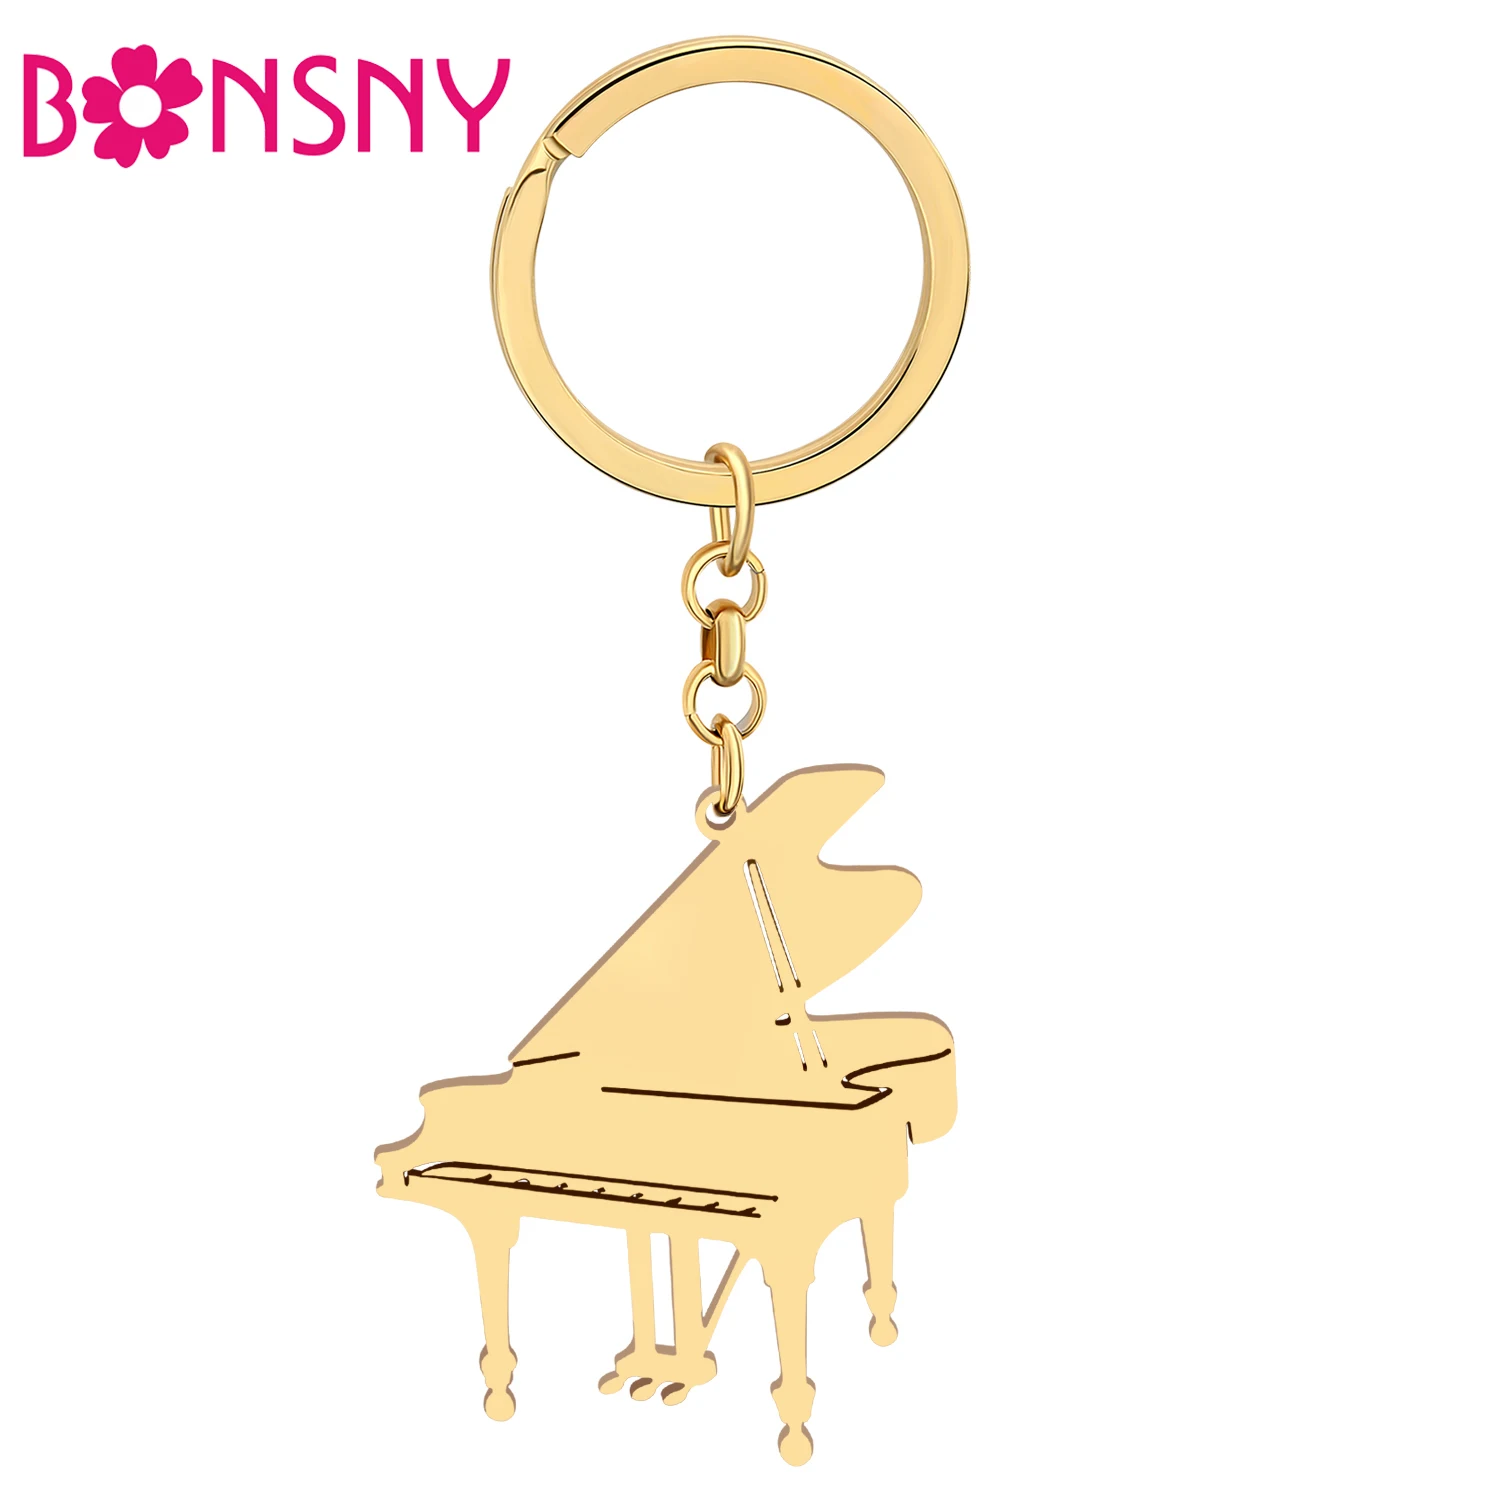 

Bonsny Stainless Steel Gold-plated Classical Piano Keychains Fashion Decorations Bag Charm Keyring Key Chain For Teen Women Gift